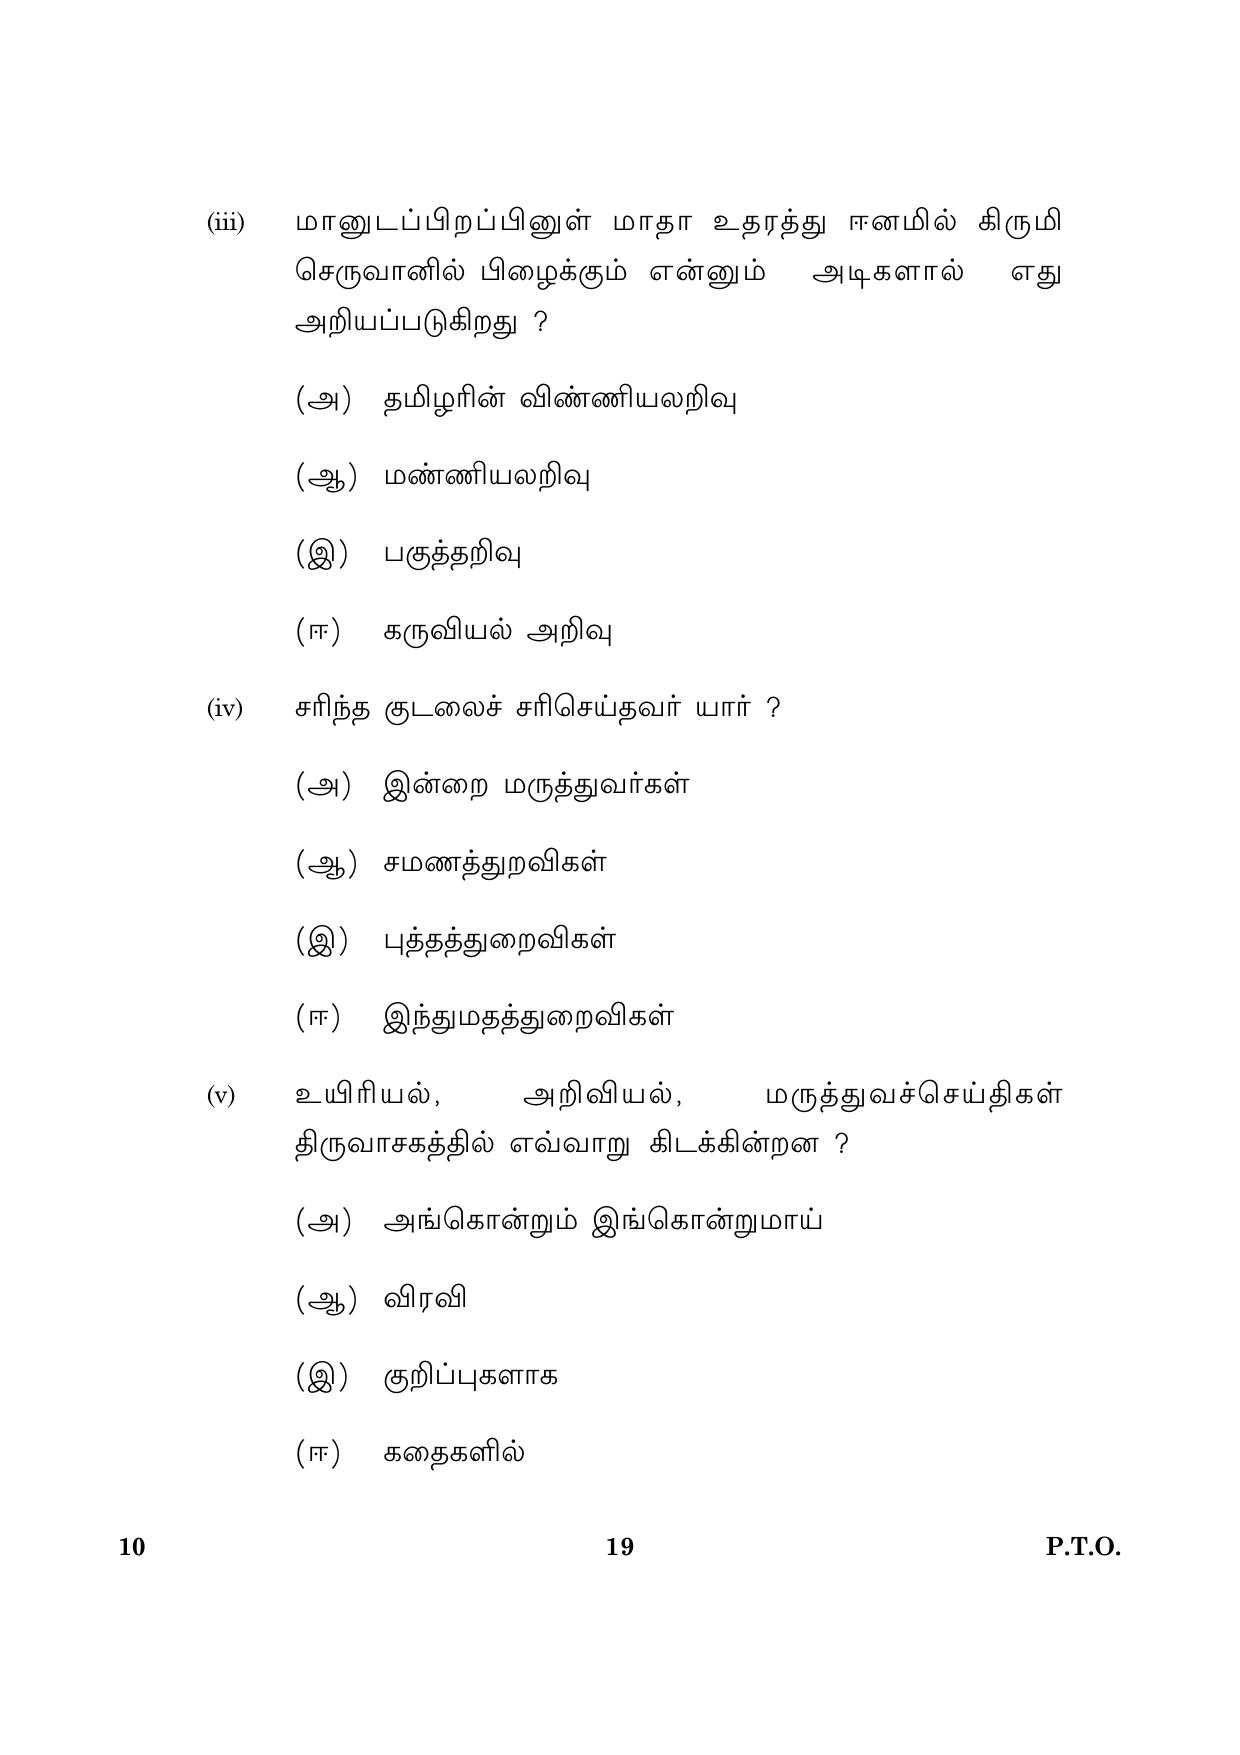 CBSE Class 10 010 Tamil 2016 Question Paper - Page 19